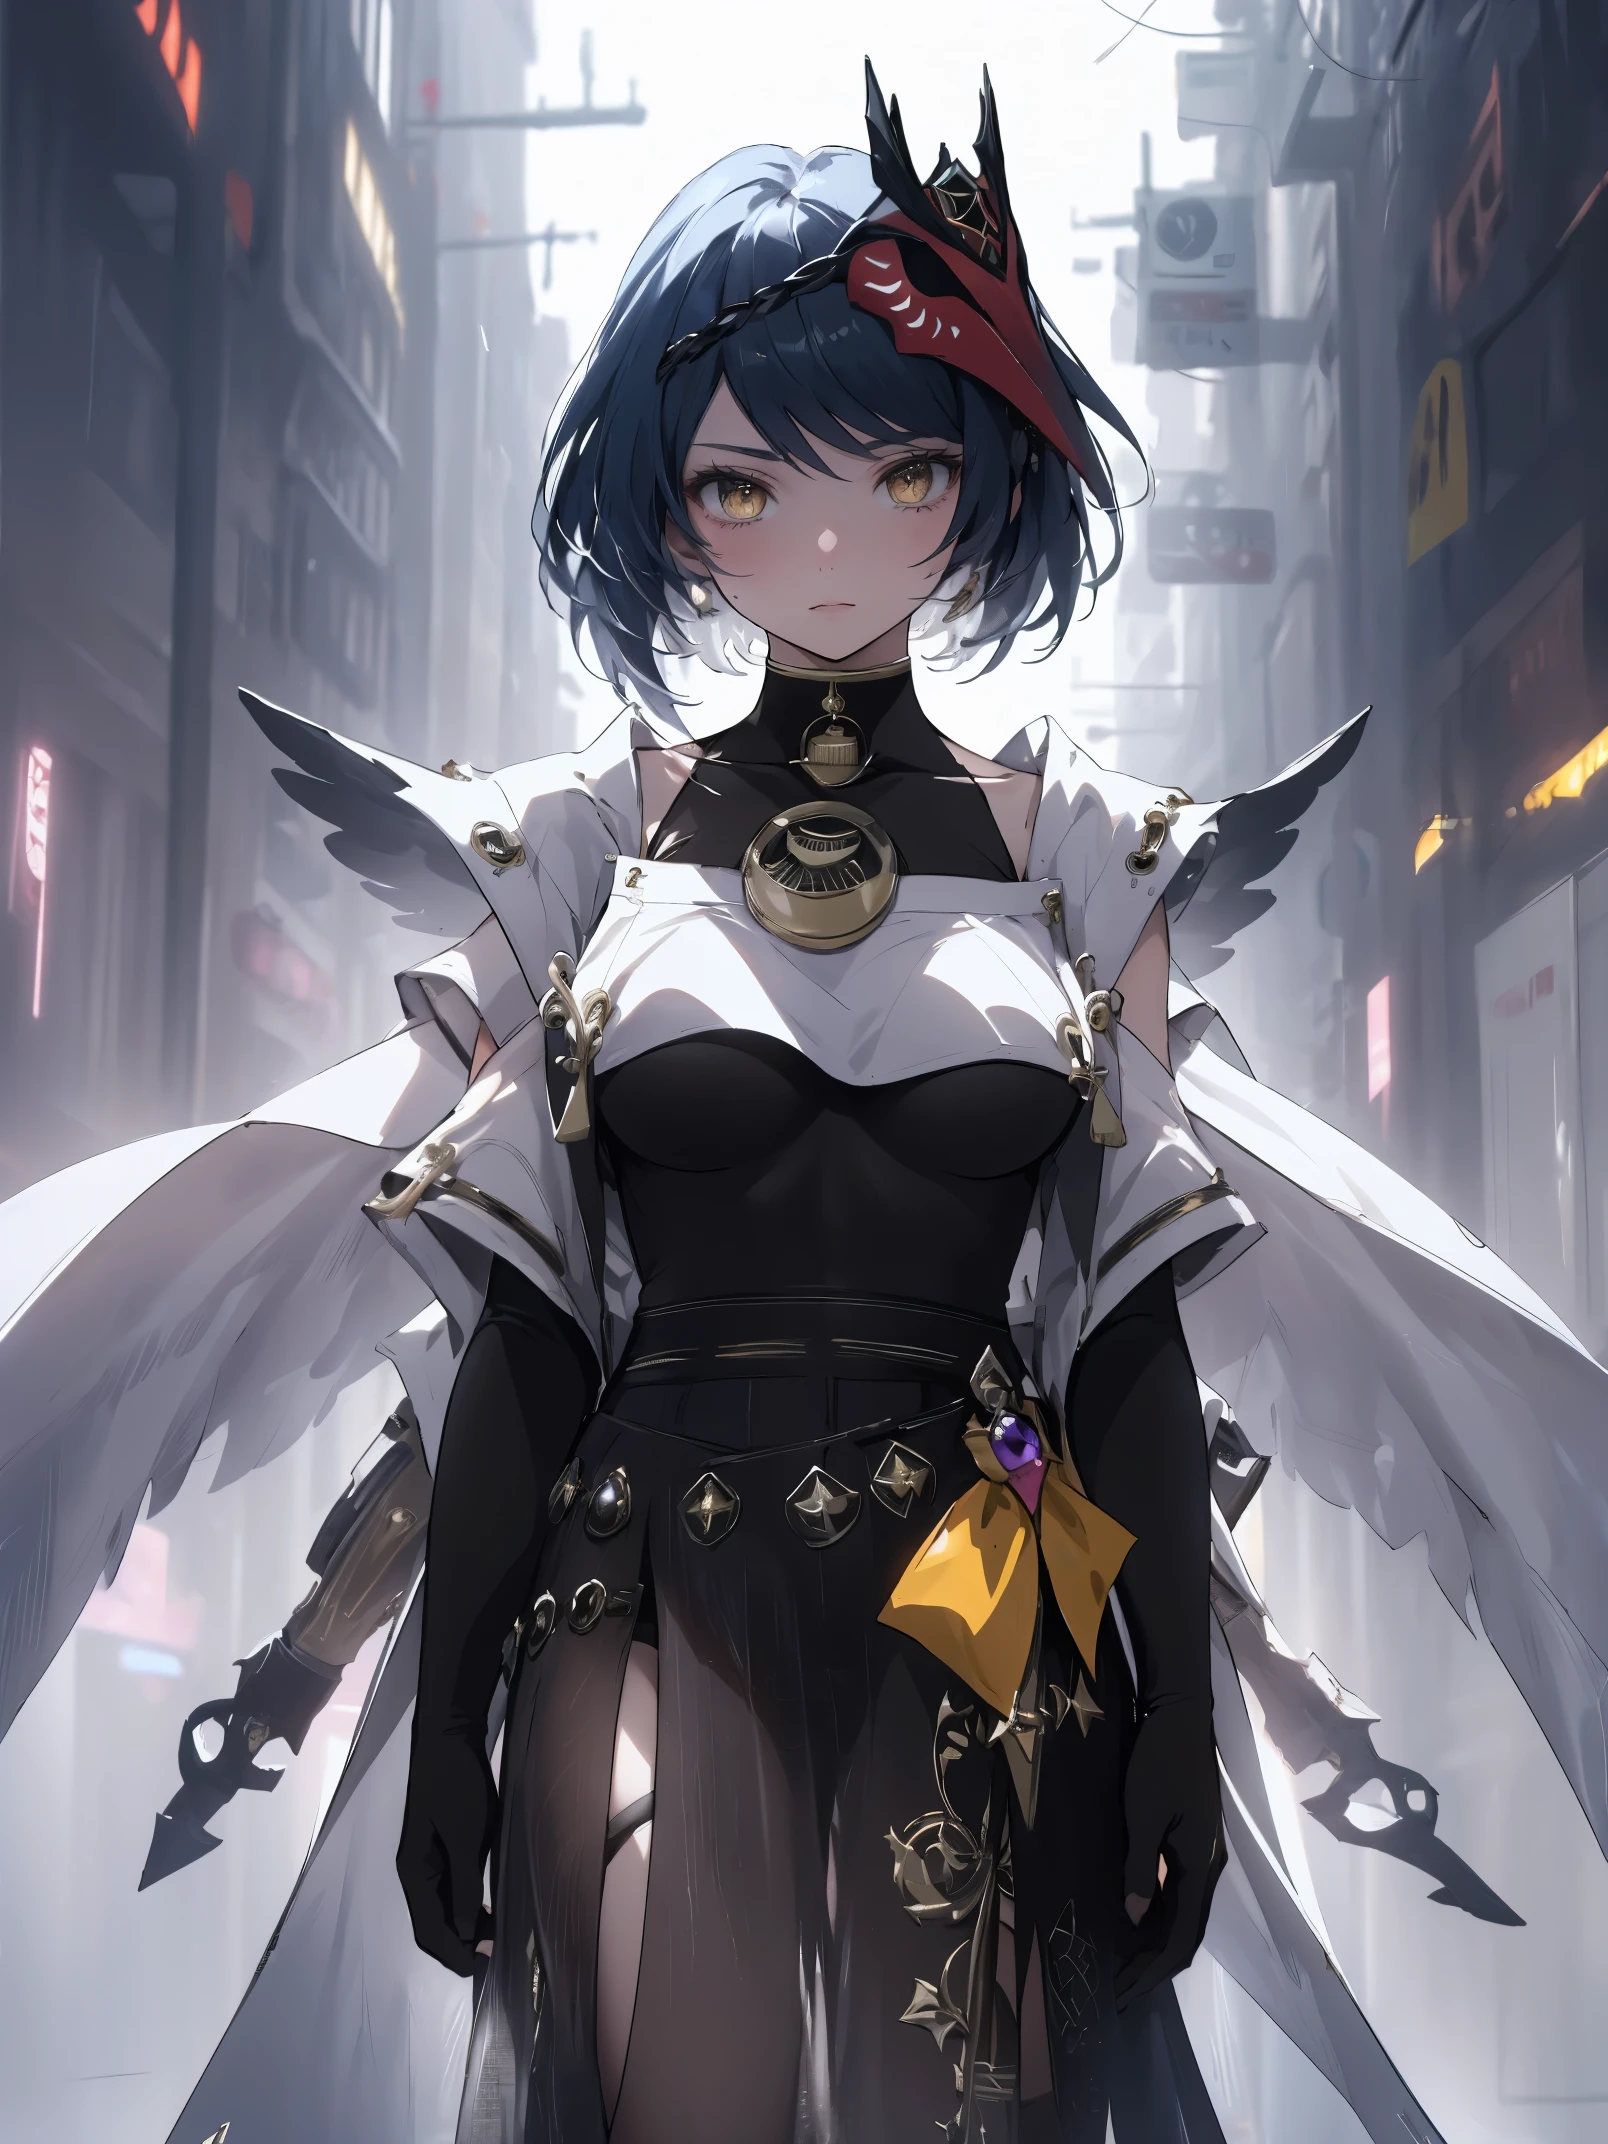 A girl wearing transparent clothes, Kujou Sara from Genshin Impact, stands in a cyberworld. She is the main focus of the painting. Her clothes are see-through, creating a sense of mystery and allure. Kujou Sara holds a glowing weapon in her hand, adding to the futuristic and cyber-themed atmosphere of the scene.

The background is predominantly white, emphasizing the contrast of Sara's figure. The white background also gives the painting a clean and minimalist aesthetic, making Sara and her glowing weapon stand out even more.

The quality of the image is of the highest standard, with a resolution of 4k or 8k, ensuring every detail and texture is captured. The painting aims to be realistic, with careful attention to anatomical accuracy and precise rendering of light and shadow.

The overall style of the painting is a masterpiece, combining elements of realism and fantasy. The transparent clothes and cyberworld setting add a touch of surrealism to the artwork.

The color palette should be vibrant and eye-catching, with a focus on blues and purples to enhance the cyberworld atmosphere and create a sense of futuristic energy. The lighting in the painting should be dynamic, with bright highlights and dramatic shadows to accentuate Sara's figure and create a sense of depth.

Ultimately, the aim of this prompt is to create a high-quality, realistic artwork featuring Kujou Sara in a cyberworld, wearing transparent clothes and holding a glowing weapon. The painting should be a masterpiece, showcasing attention to detail, vivid colors, and dynamic lighting.